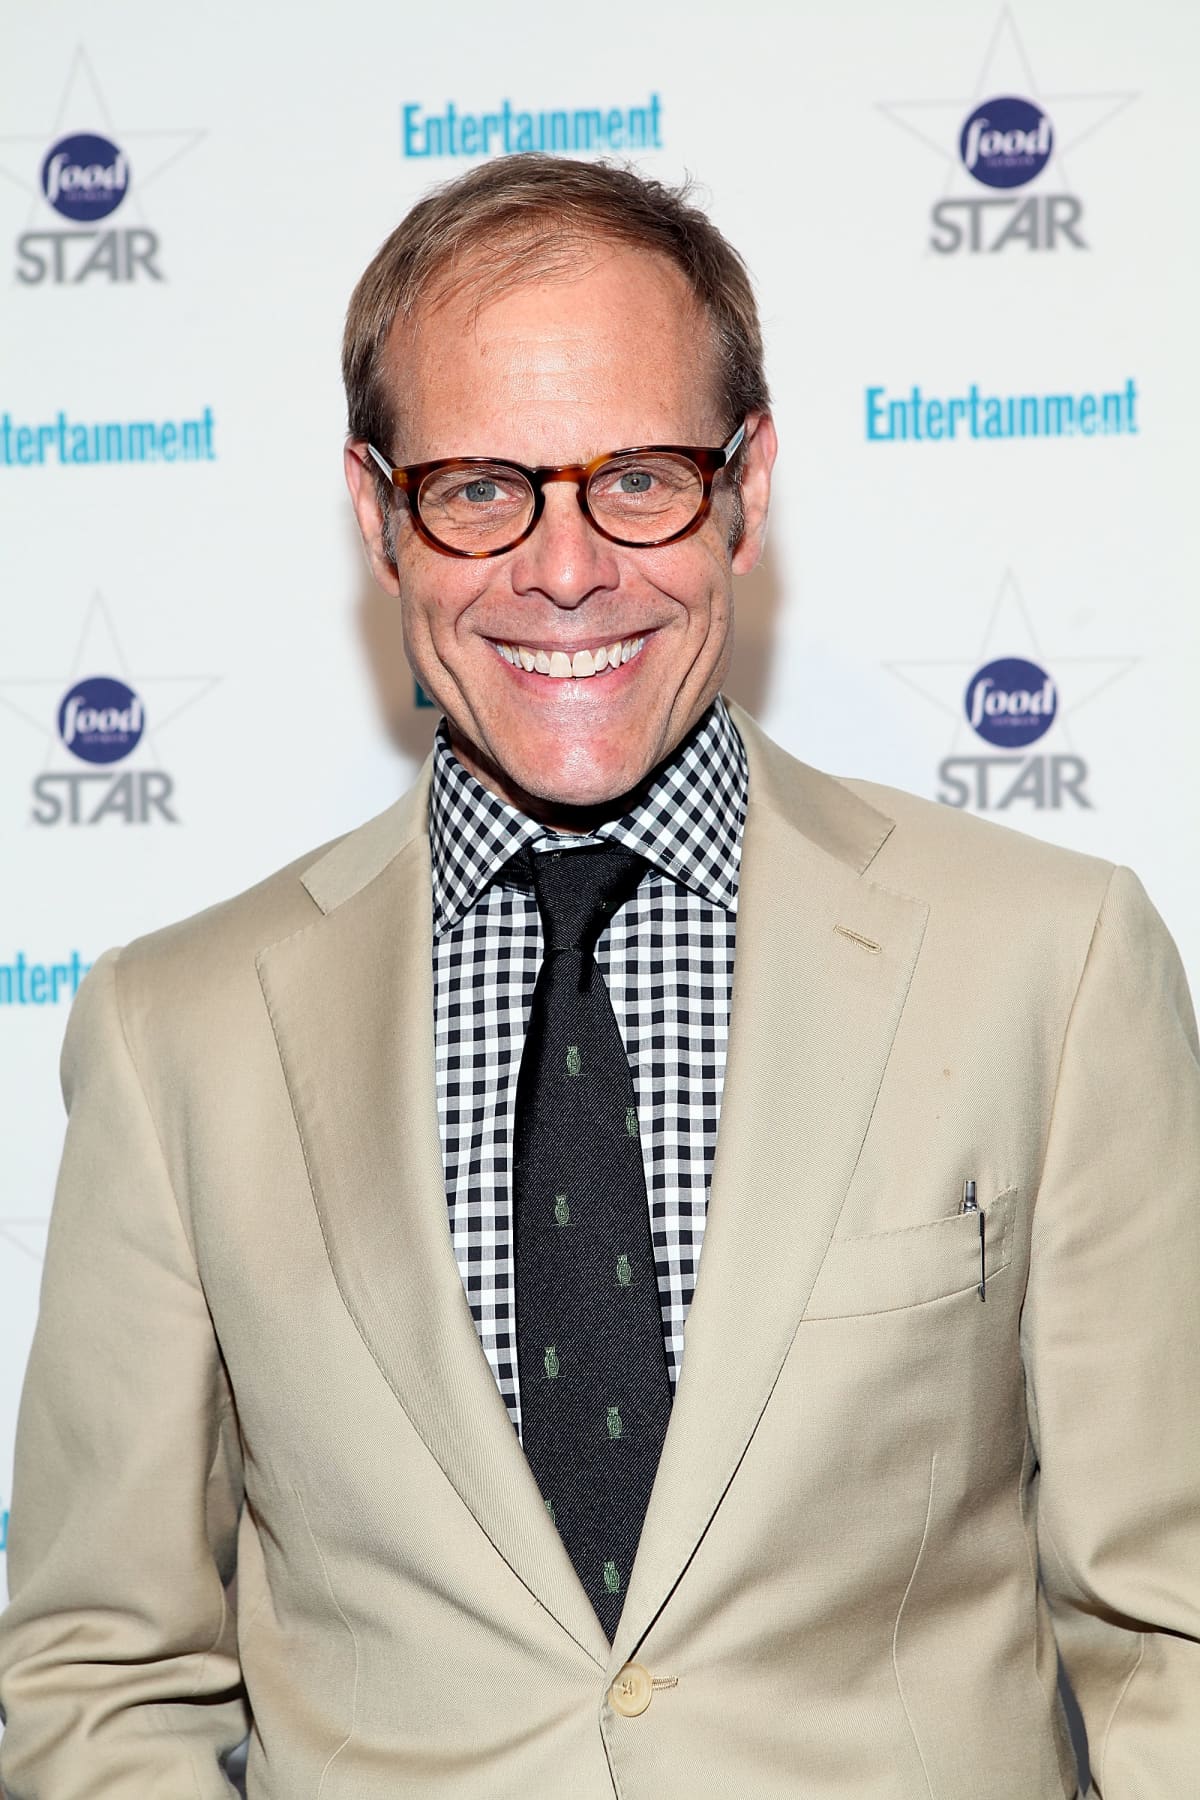 HOLLYWOOD, CA - FEBRUARY 23:  Host Alton Brown attends the premiere of "The Illusionists - Live From Broadway" at the Pantages Theatre on February 23, 2016 in Hollywood, California.  (Photo by Vincent Sandoval/WireImage)